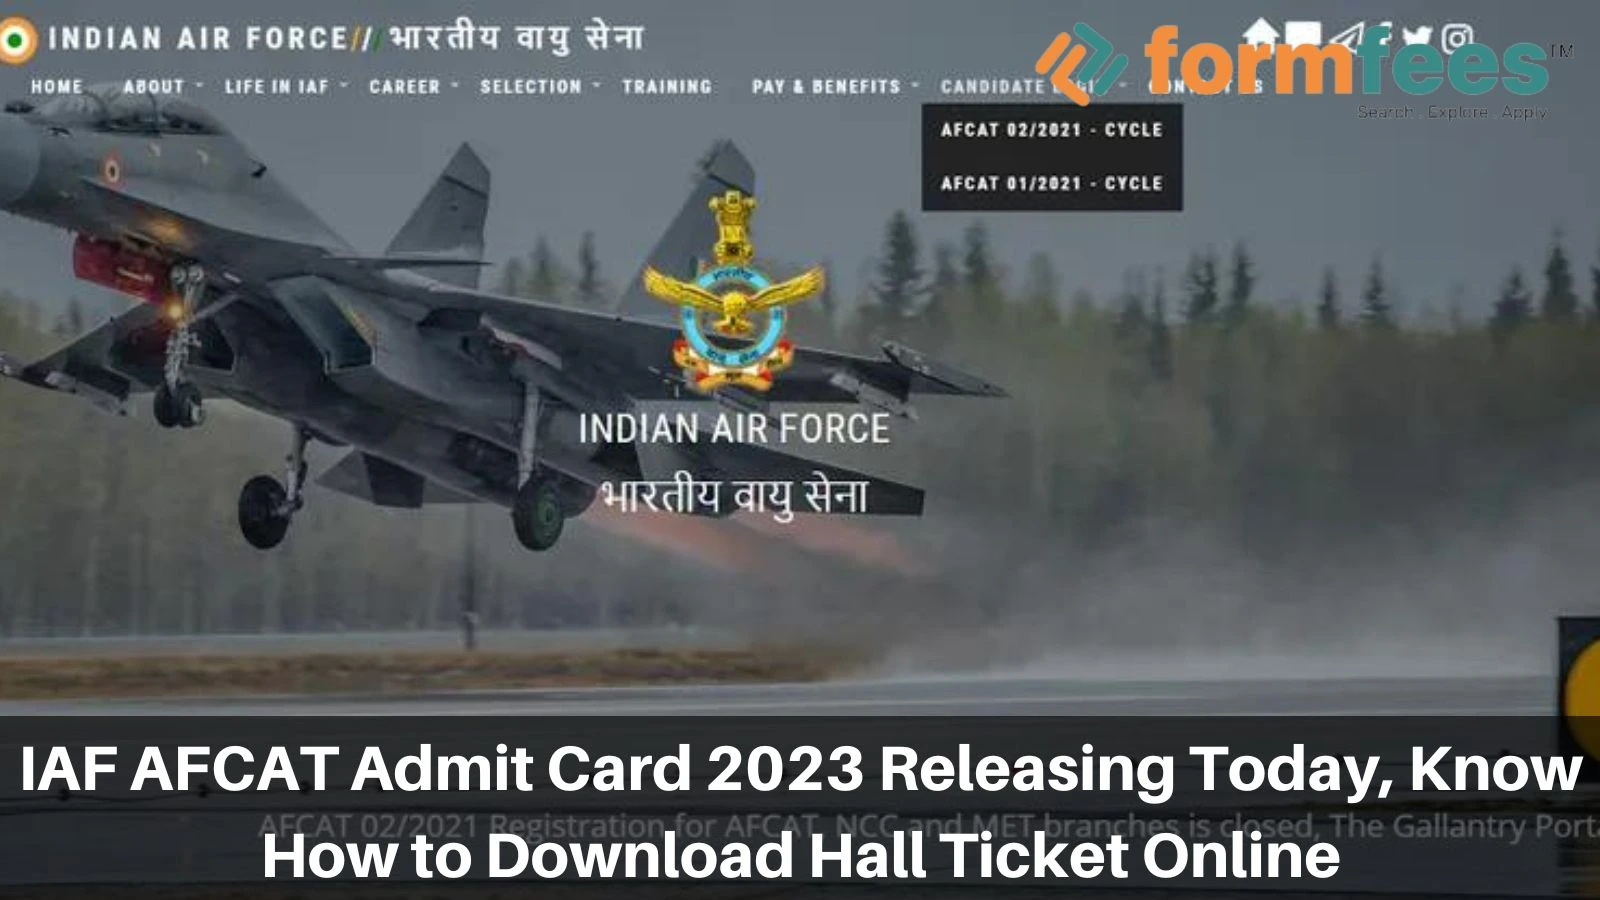 IAF AFCAT Admit Card 2023 Releasing Today, Know How to Download Hall Ticket Online